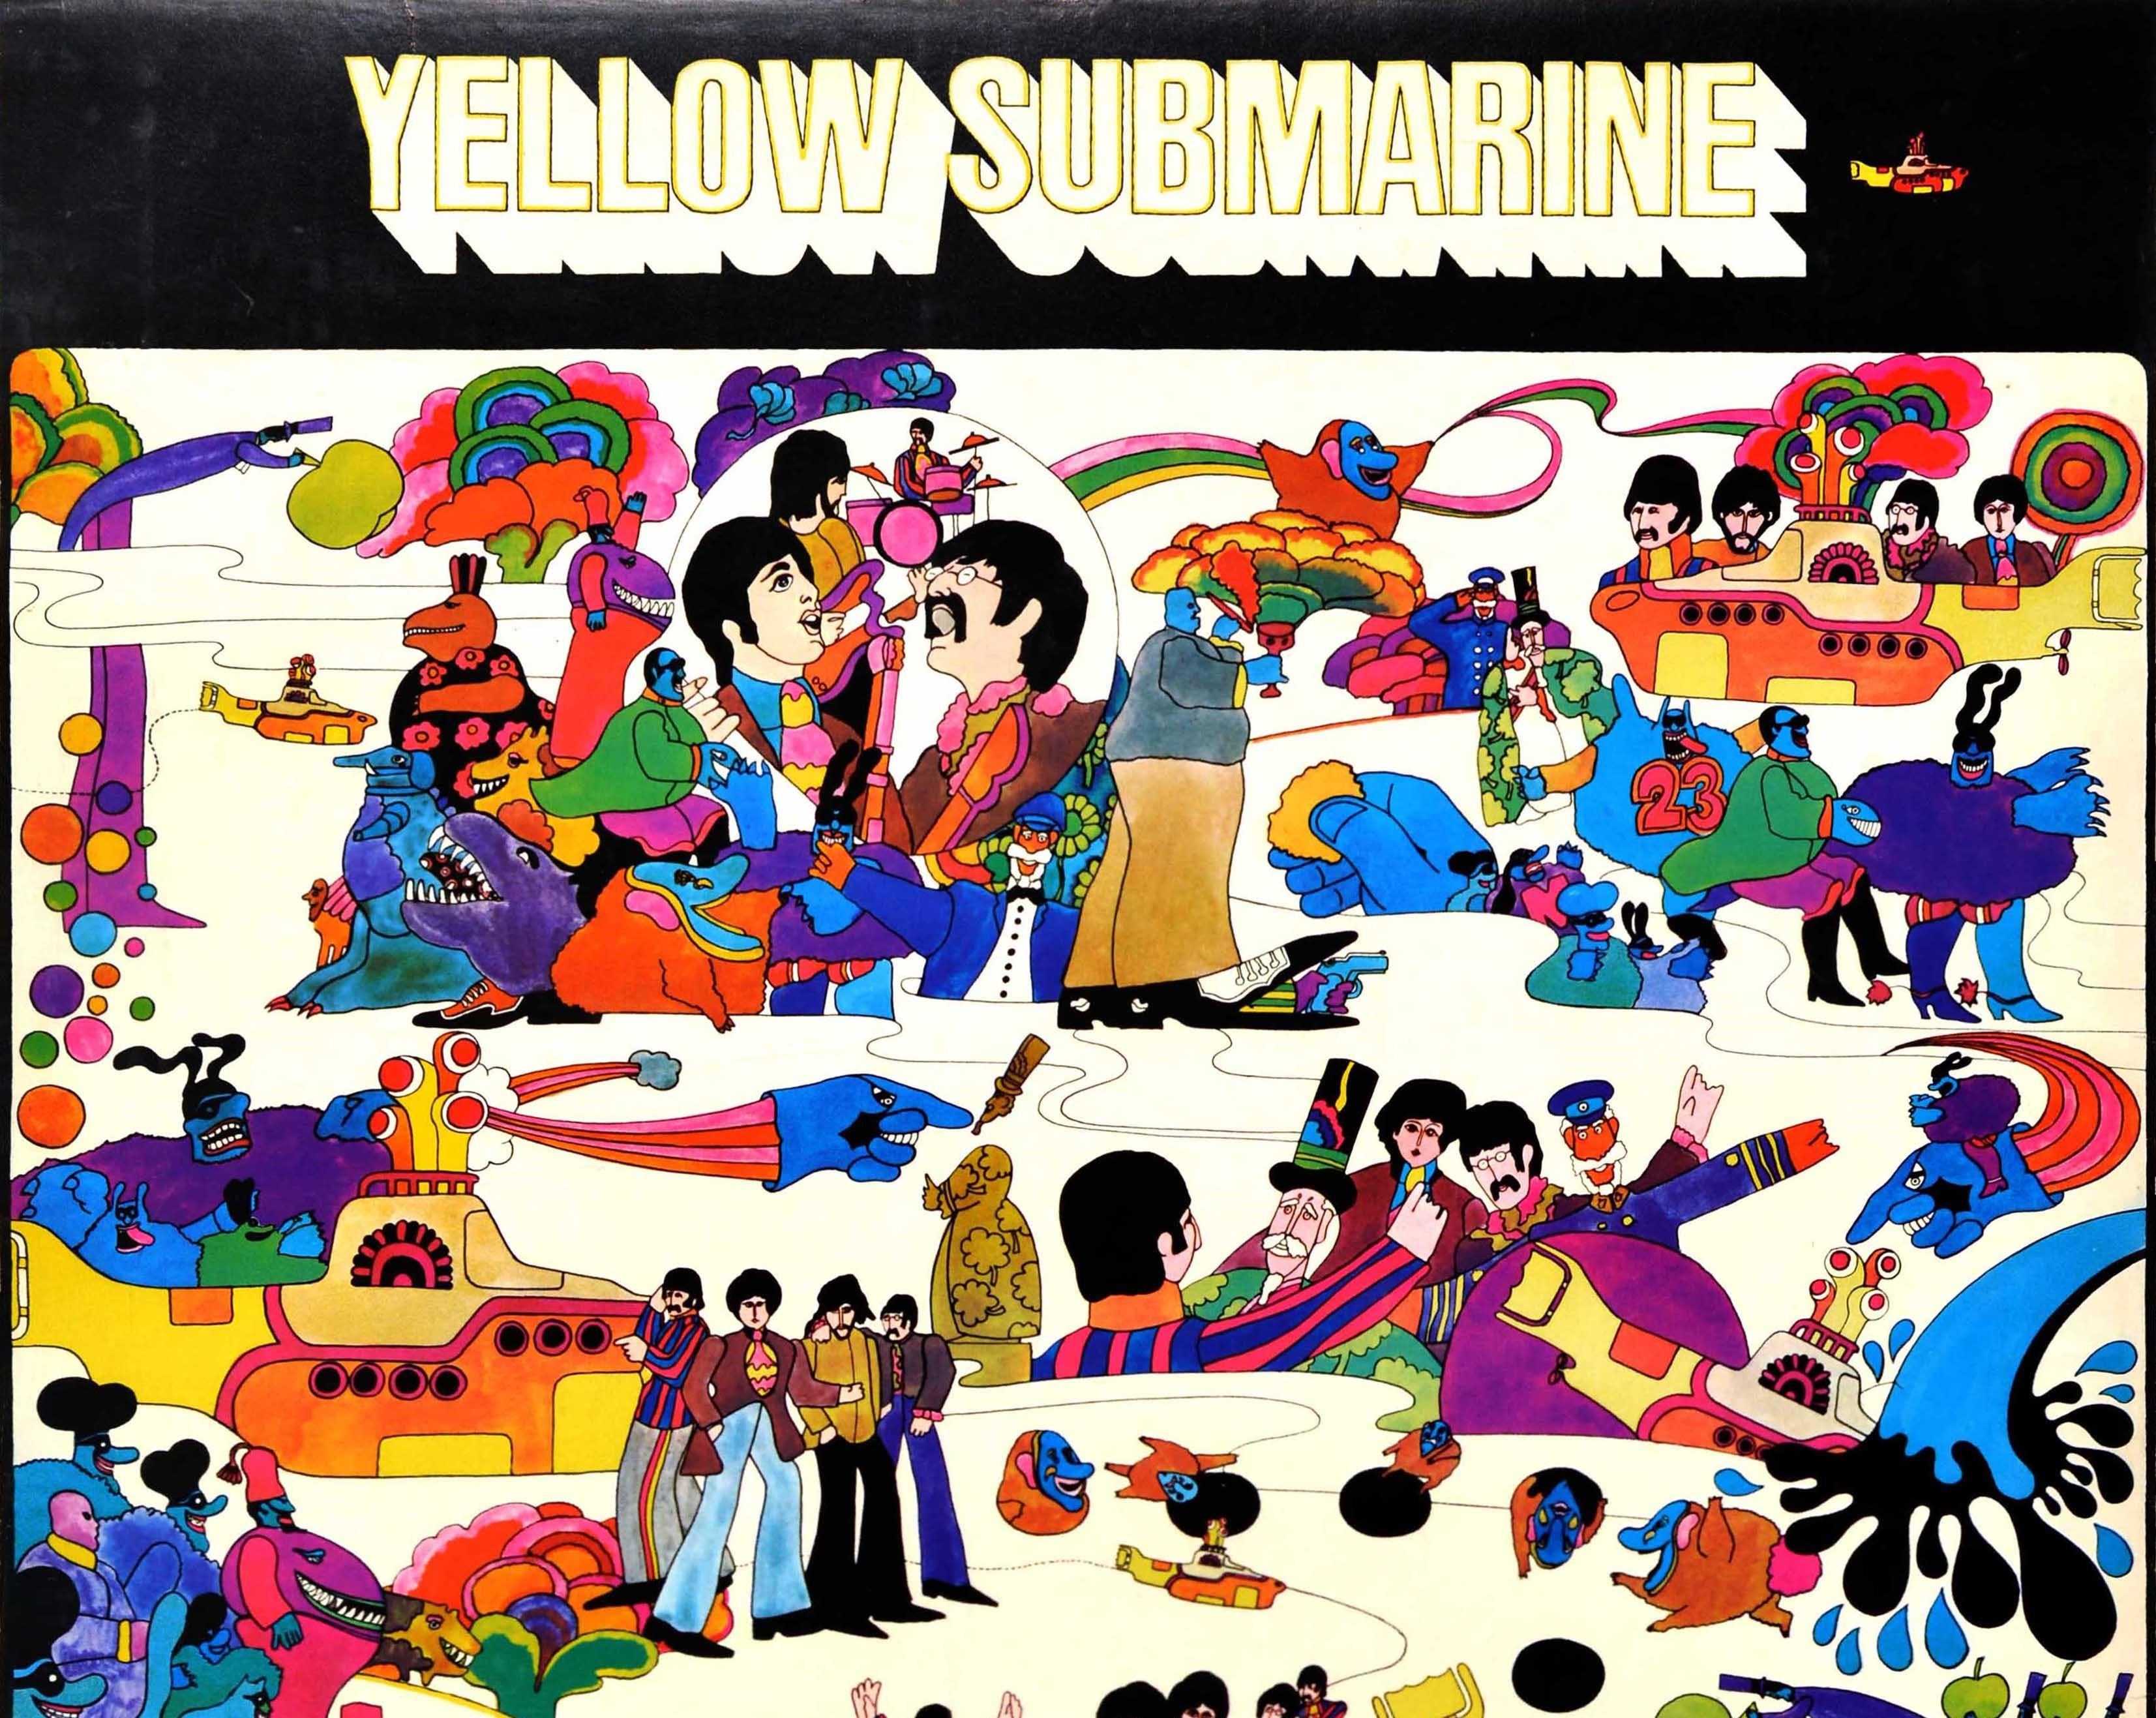 Original vintage musical film poster issued by Hallmark for the animated movie Yellow Submarine starring Sgt. Pepper's Lonely Hearts Club Band based on a song by John Lennon and Paul McCartney and featuring the music of The Beatles (John Lennon,